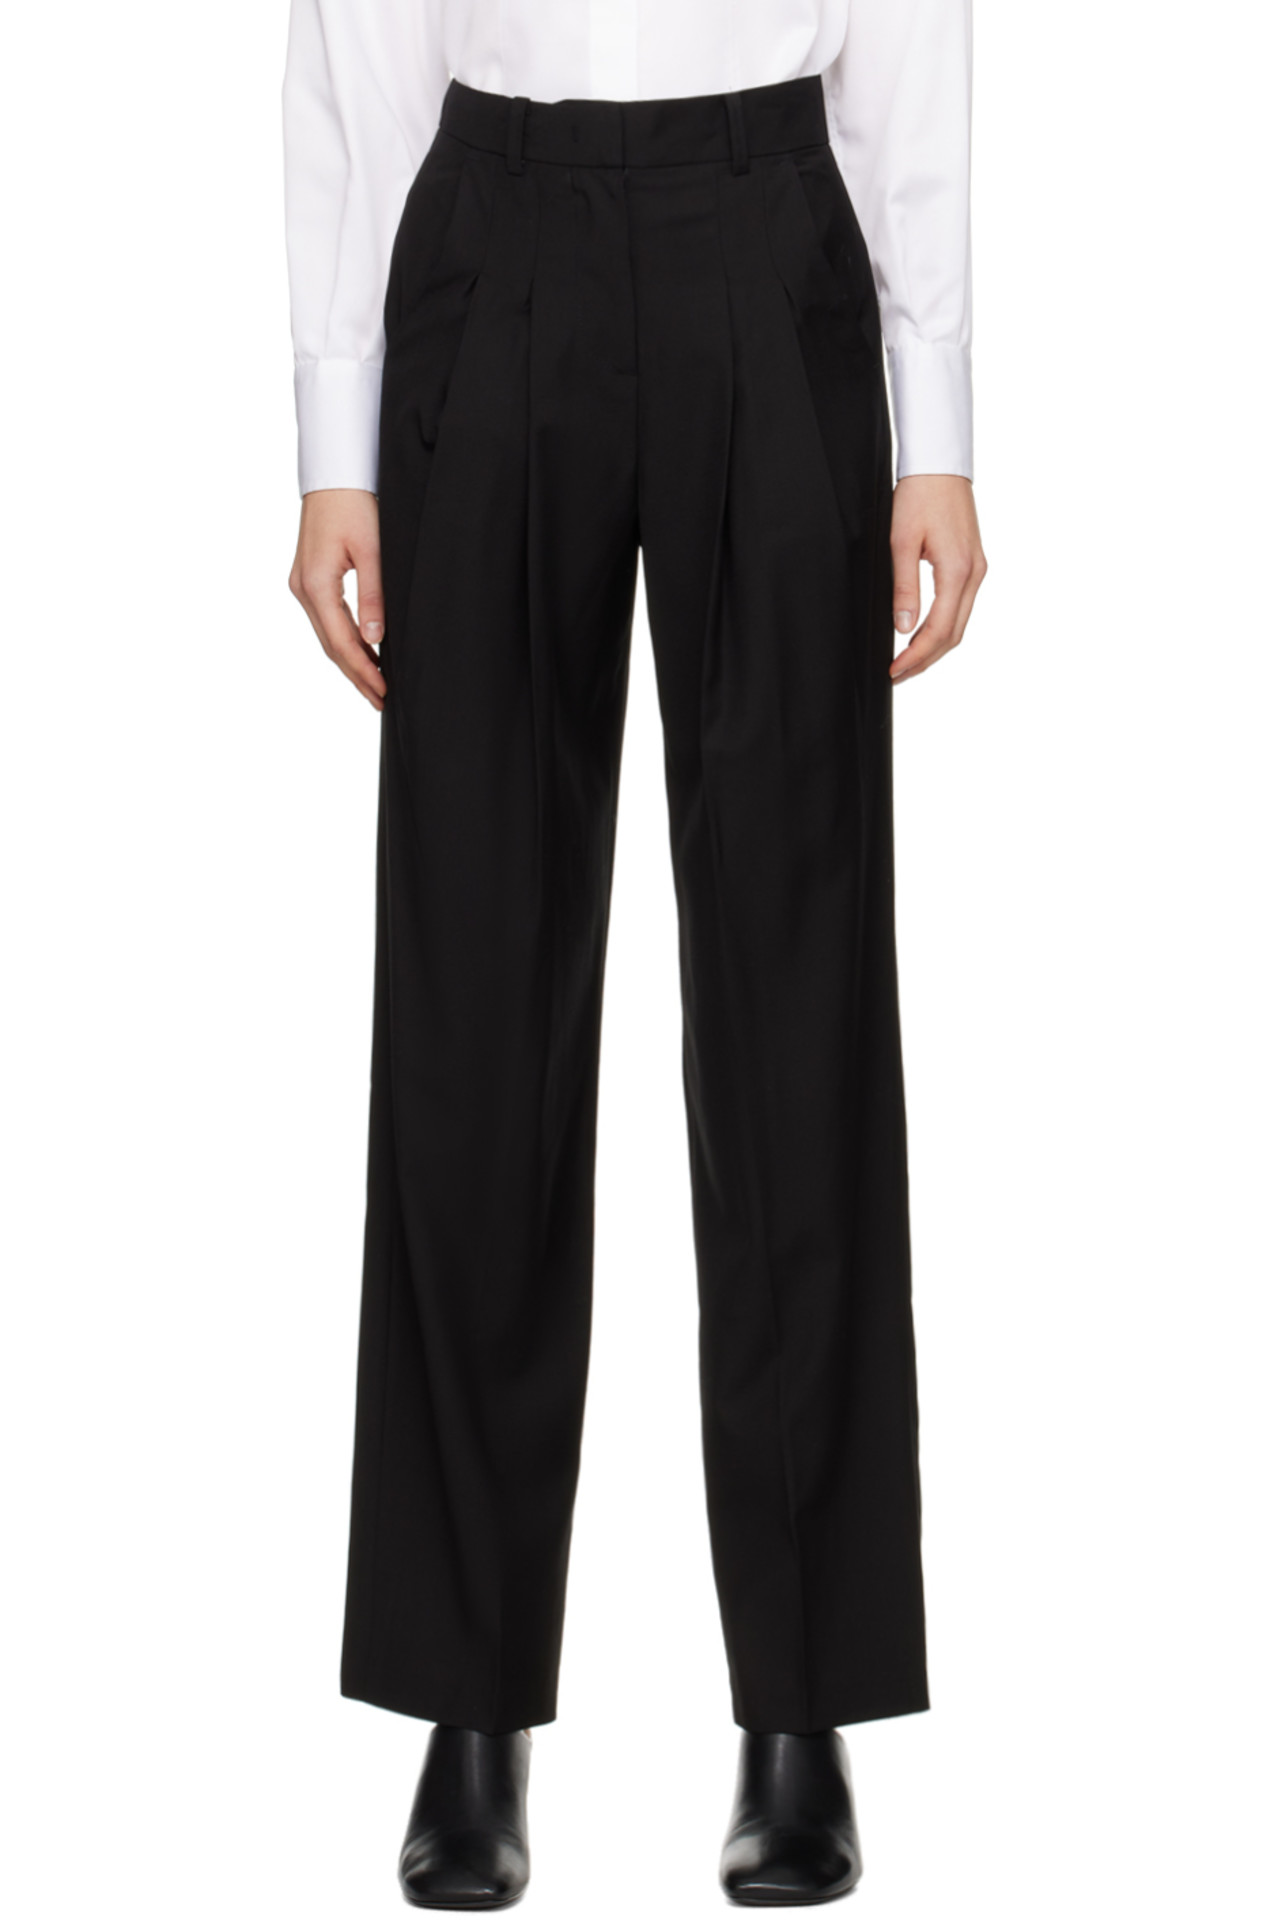  THE FRANKIE SHOP Black Gelso Trousers